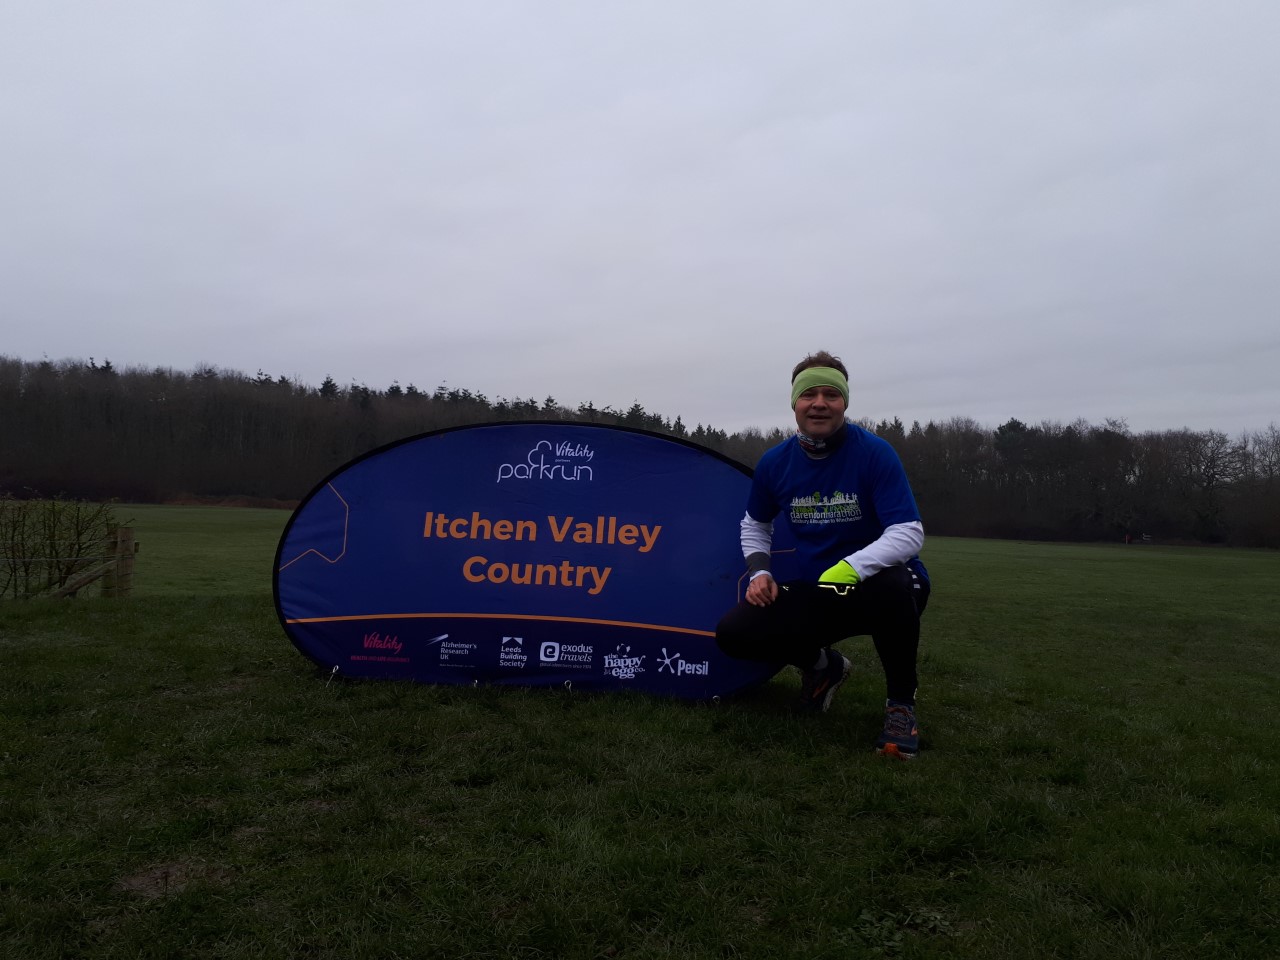 Image shows Tom Evison squatting down next to an Itchen Valley Country banner following a Parkrun